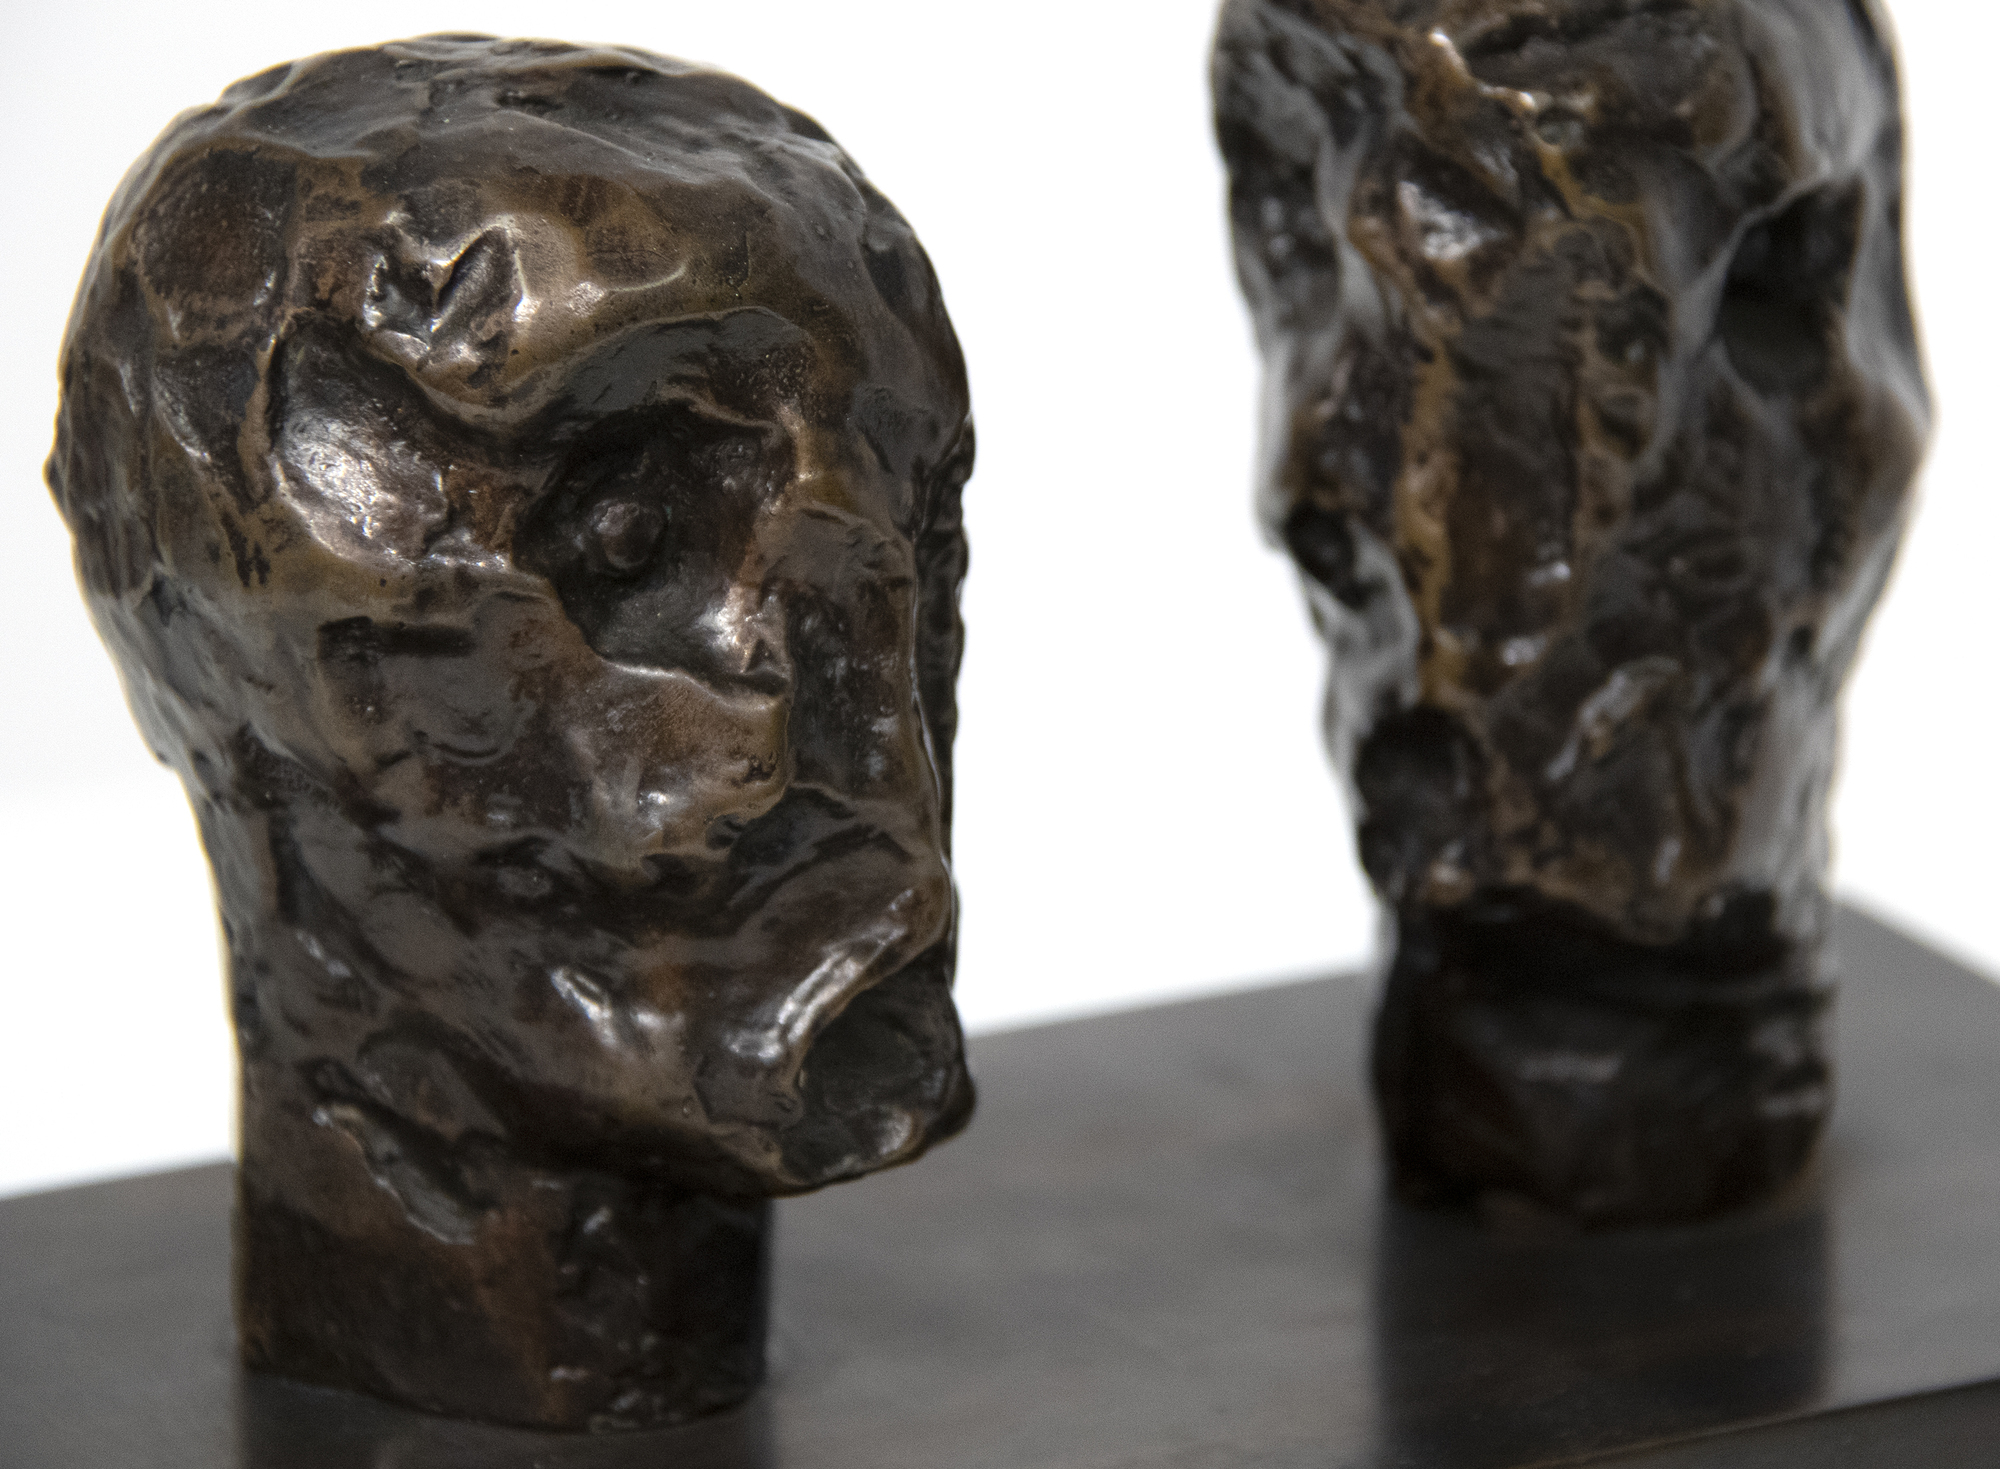 HENRY MOORE - Emperor's Heads - bronze with brown patina - 6 3/4 x 8 1/4 x 4 1/2 in.